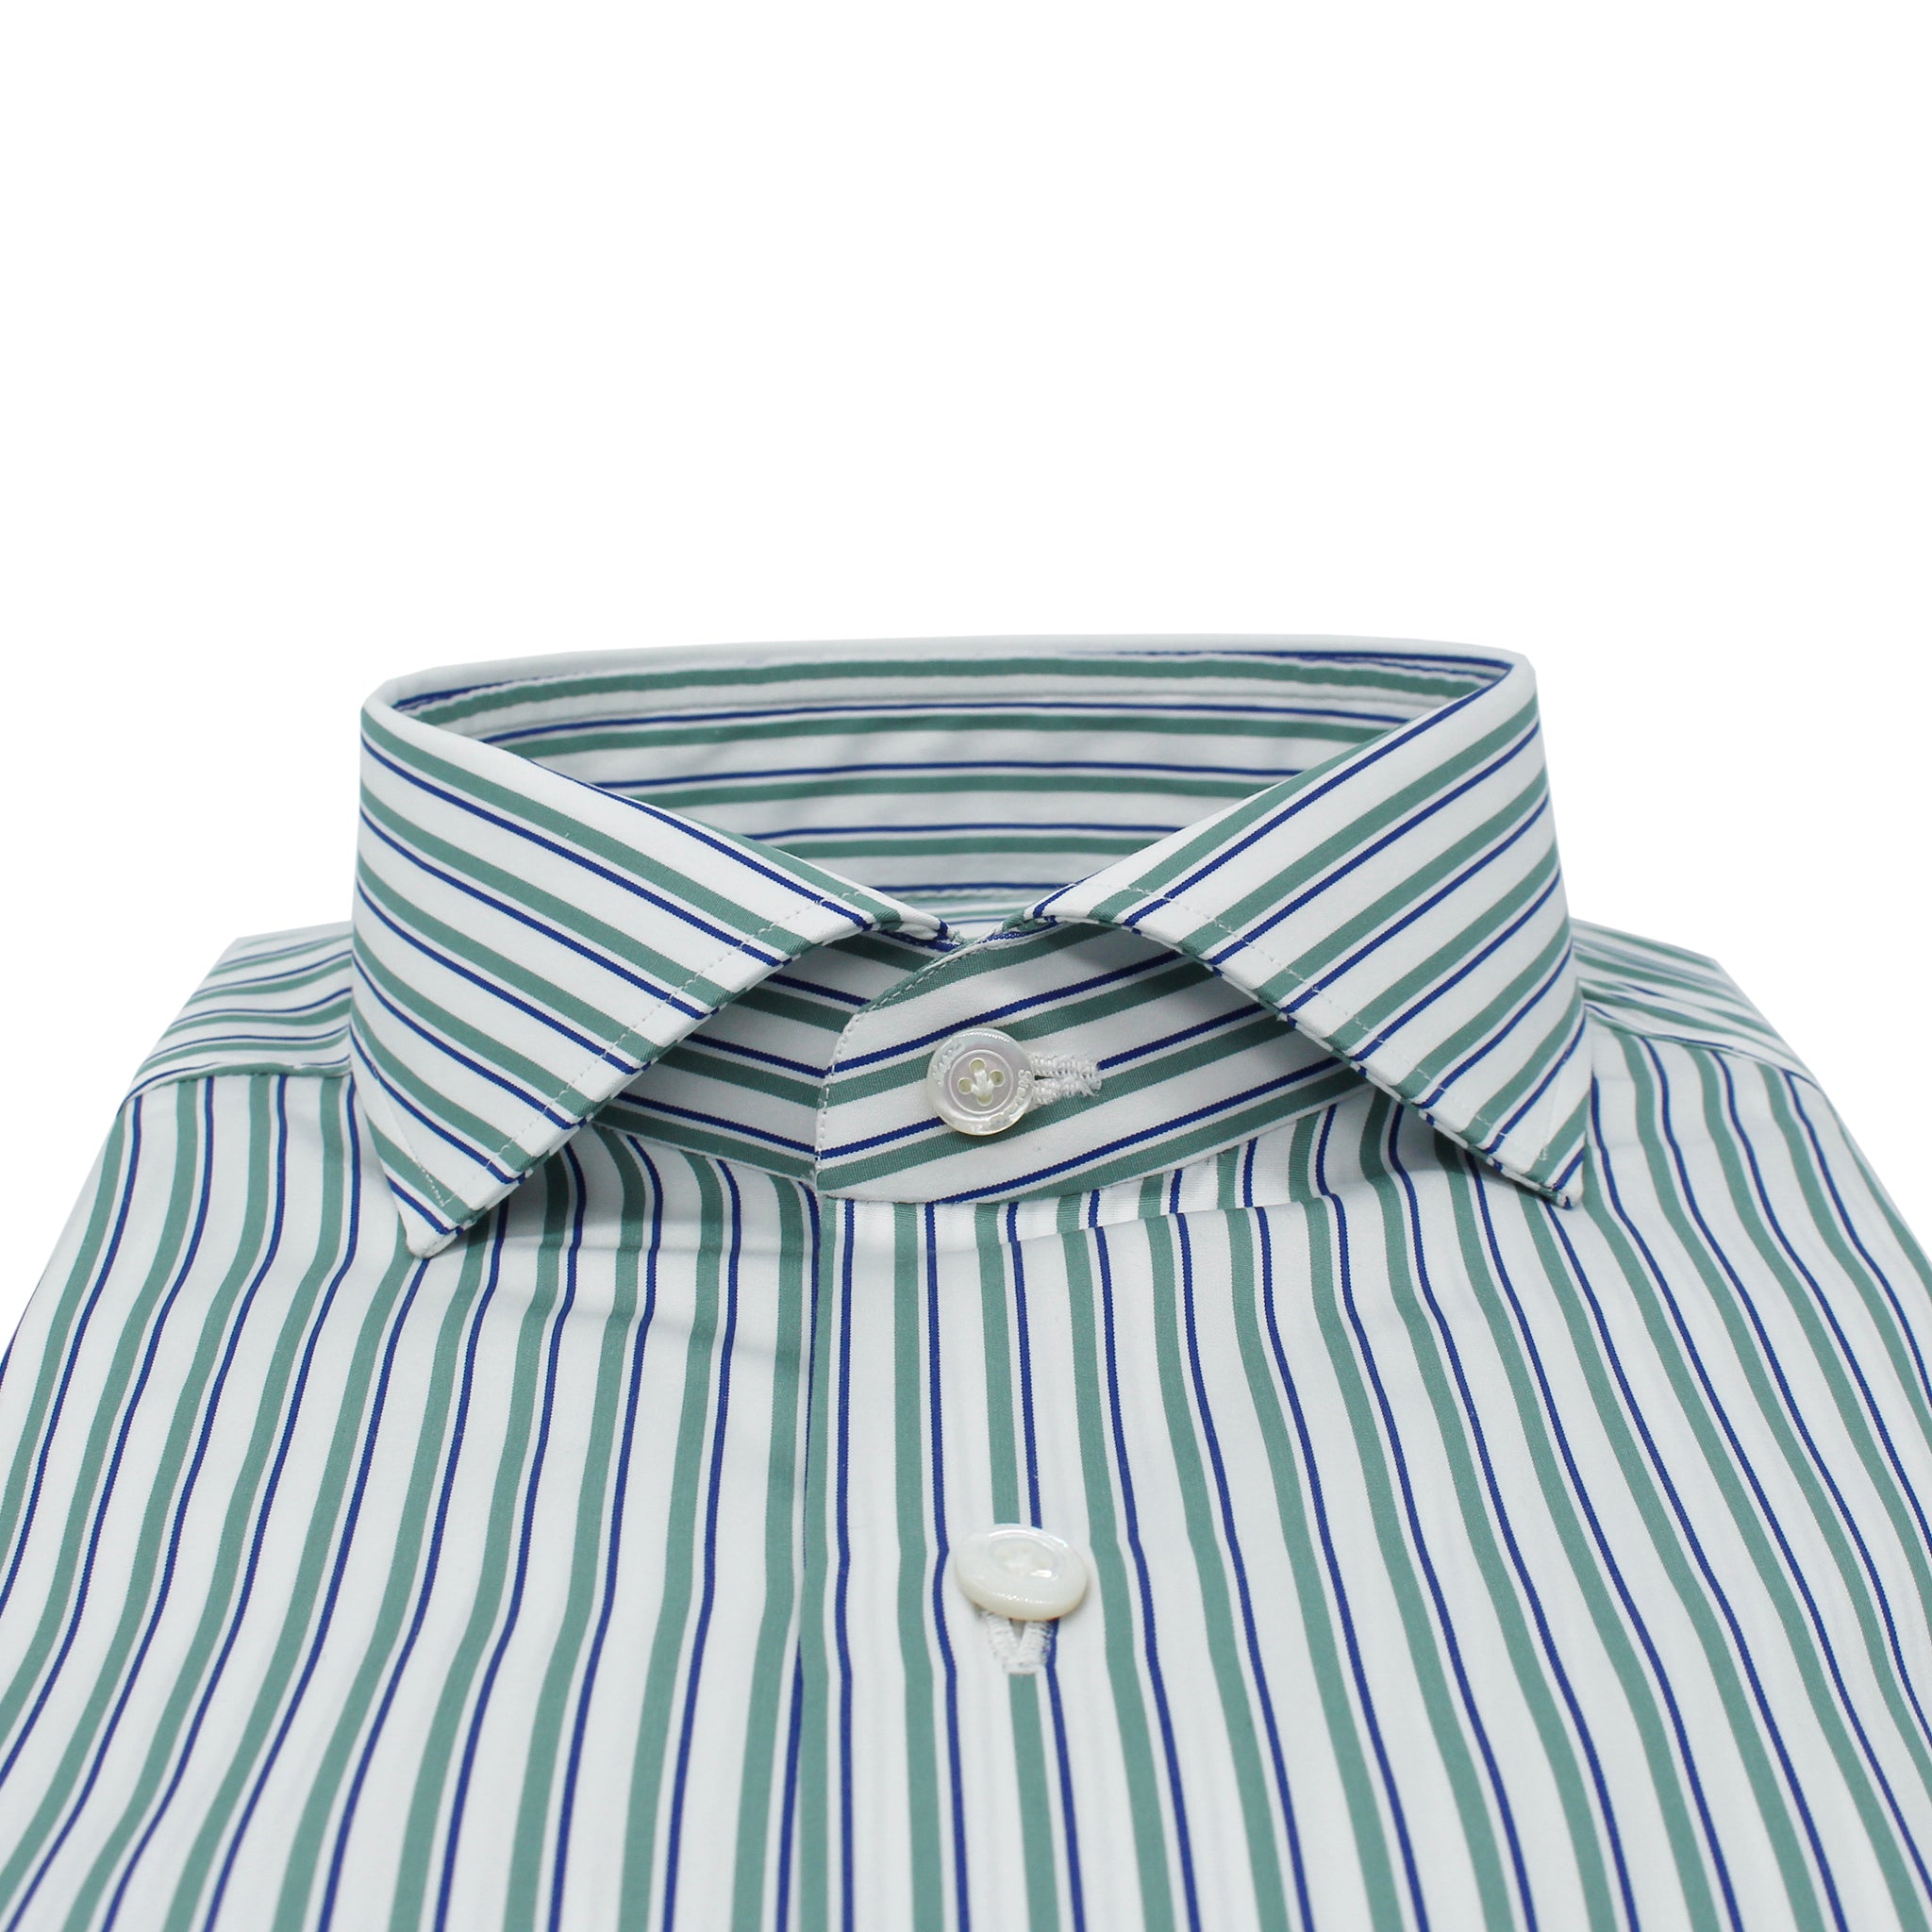 Naples regular fit striped shirt with darts in back